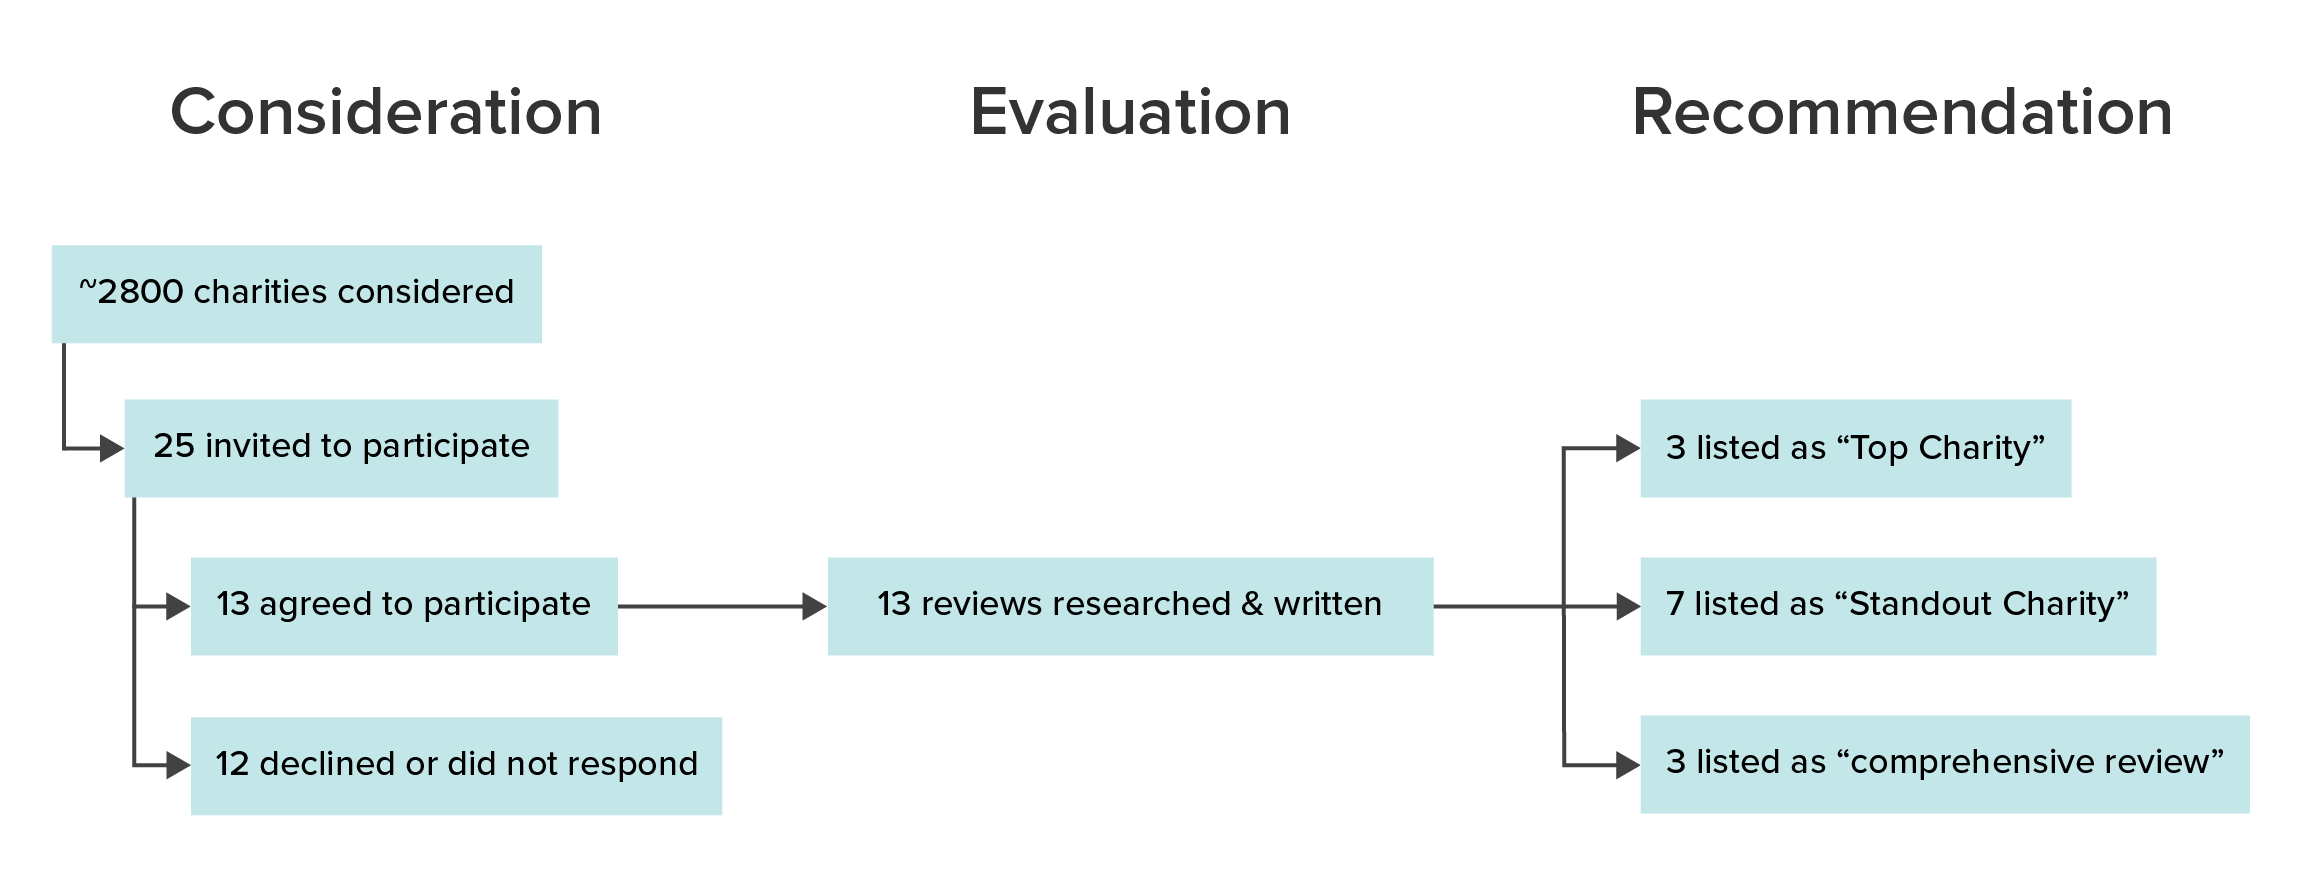 Charity Evaluation Process 2021